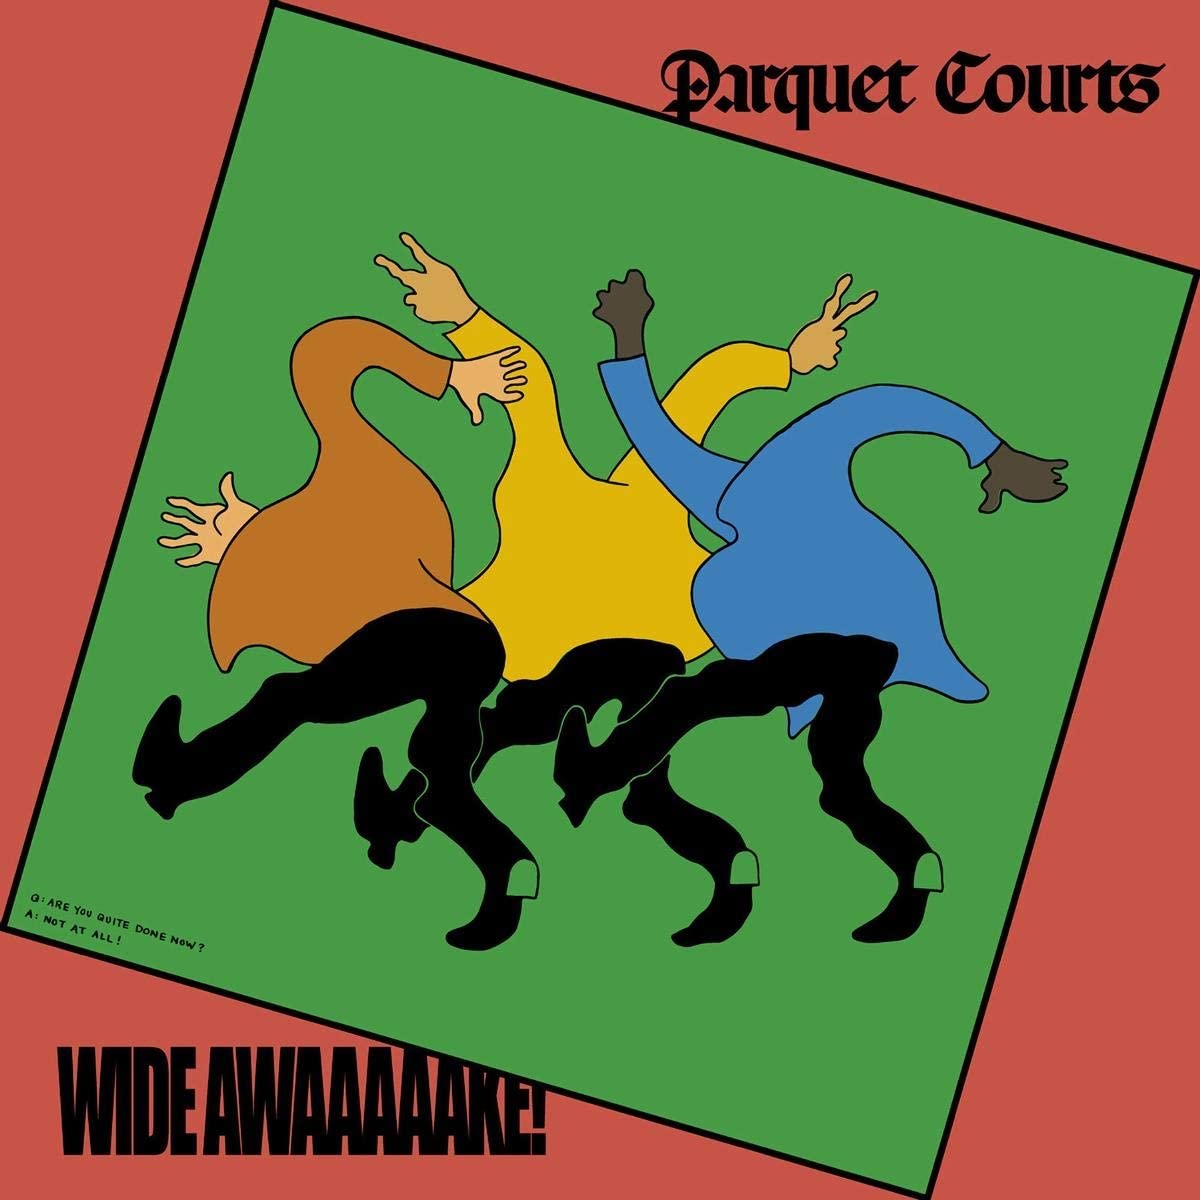 Incredible 5th studio album on Vinyl from Parquet Courts featuring Total Football, Freebird II & Mardi Gras Beads.